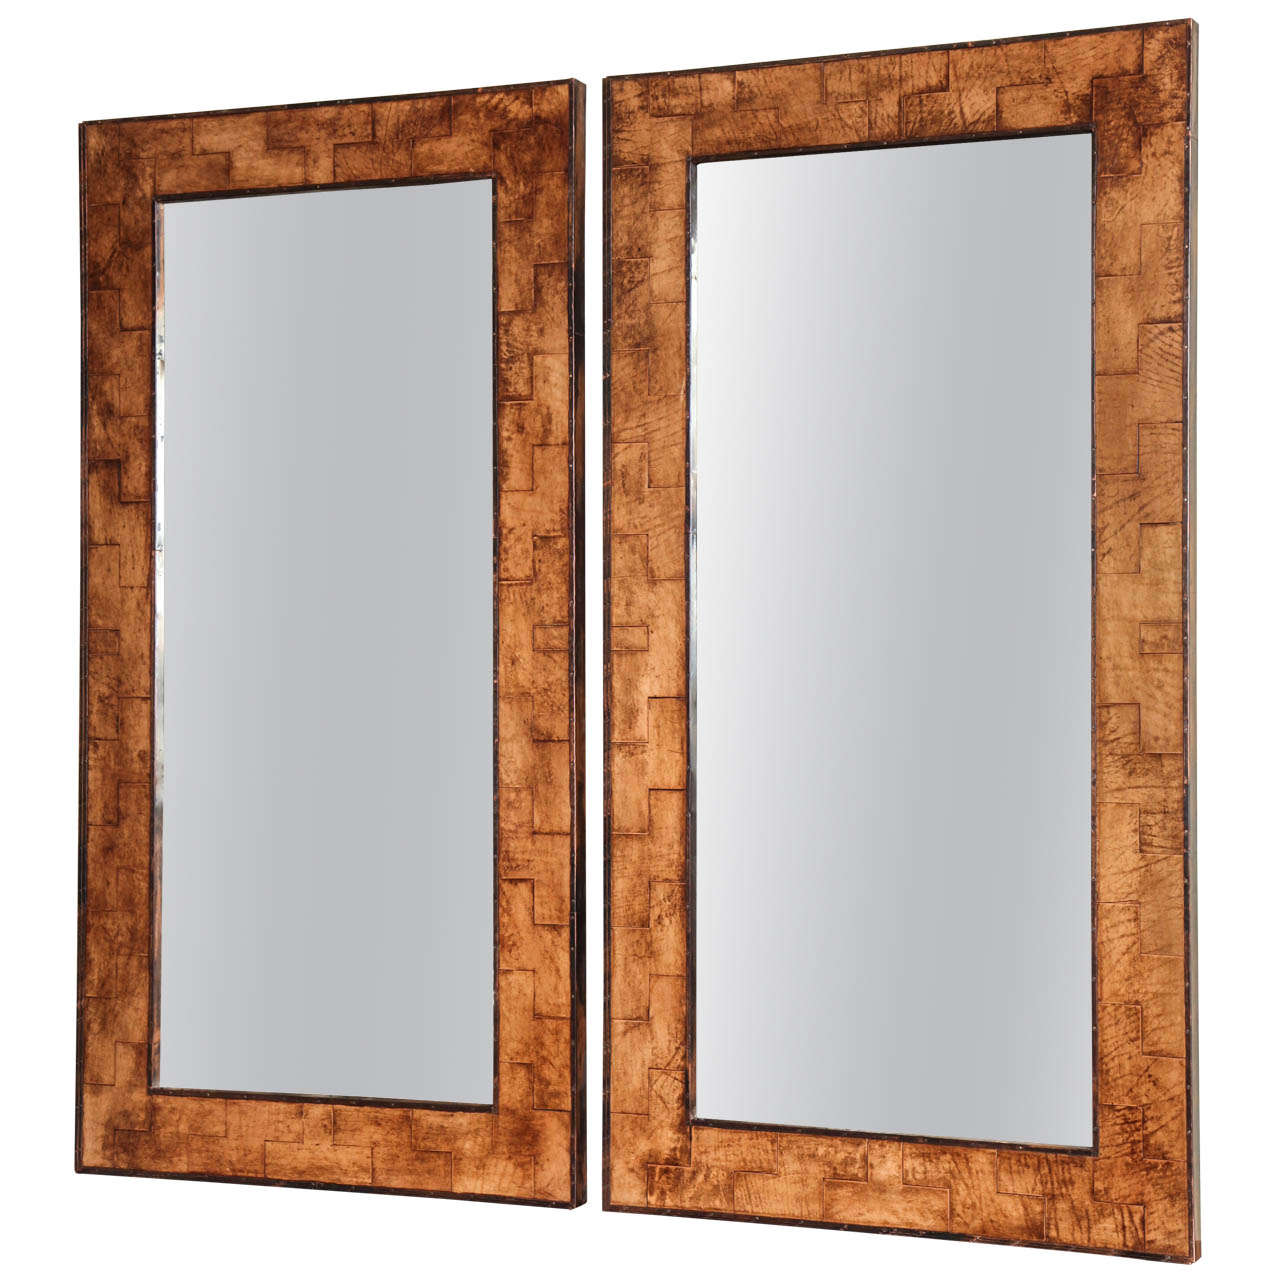 Pair of Mirrors with Vintage Leather Frames and Antique Glass